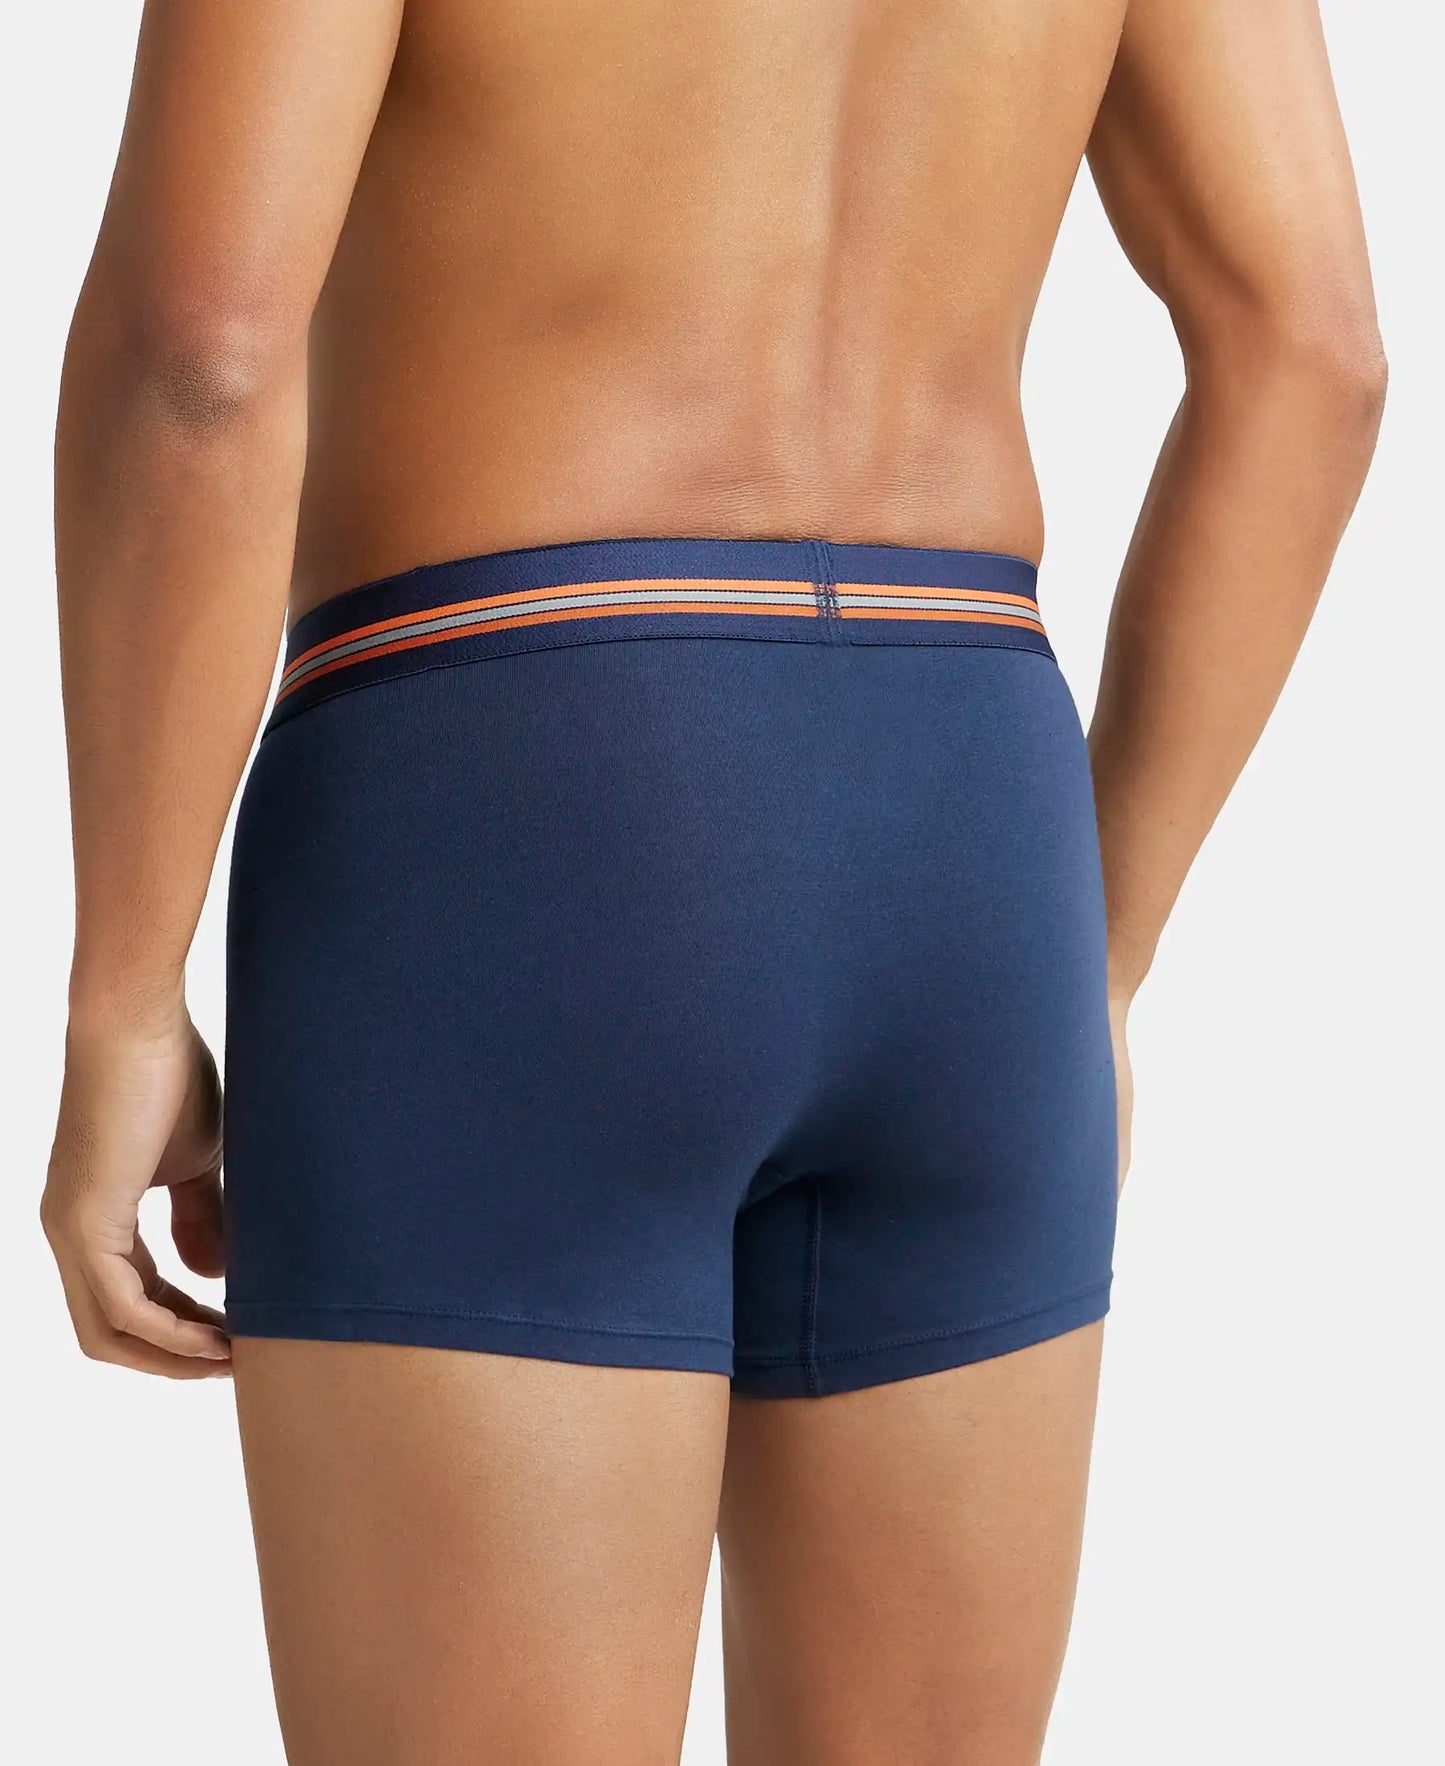 Super Combed Cotton Elastane Printed Trunk with Ultrasoft Waistband - Navy Print-4